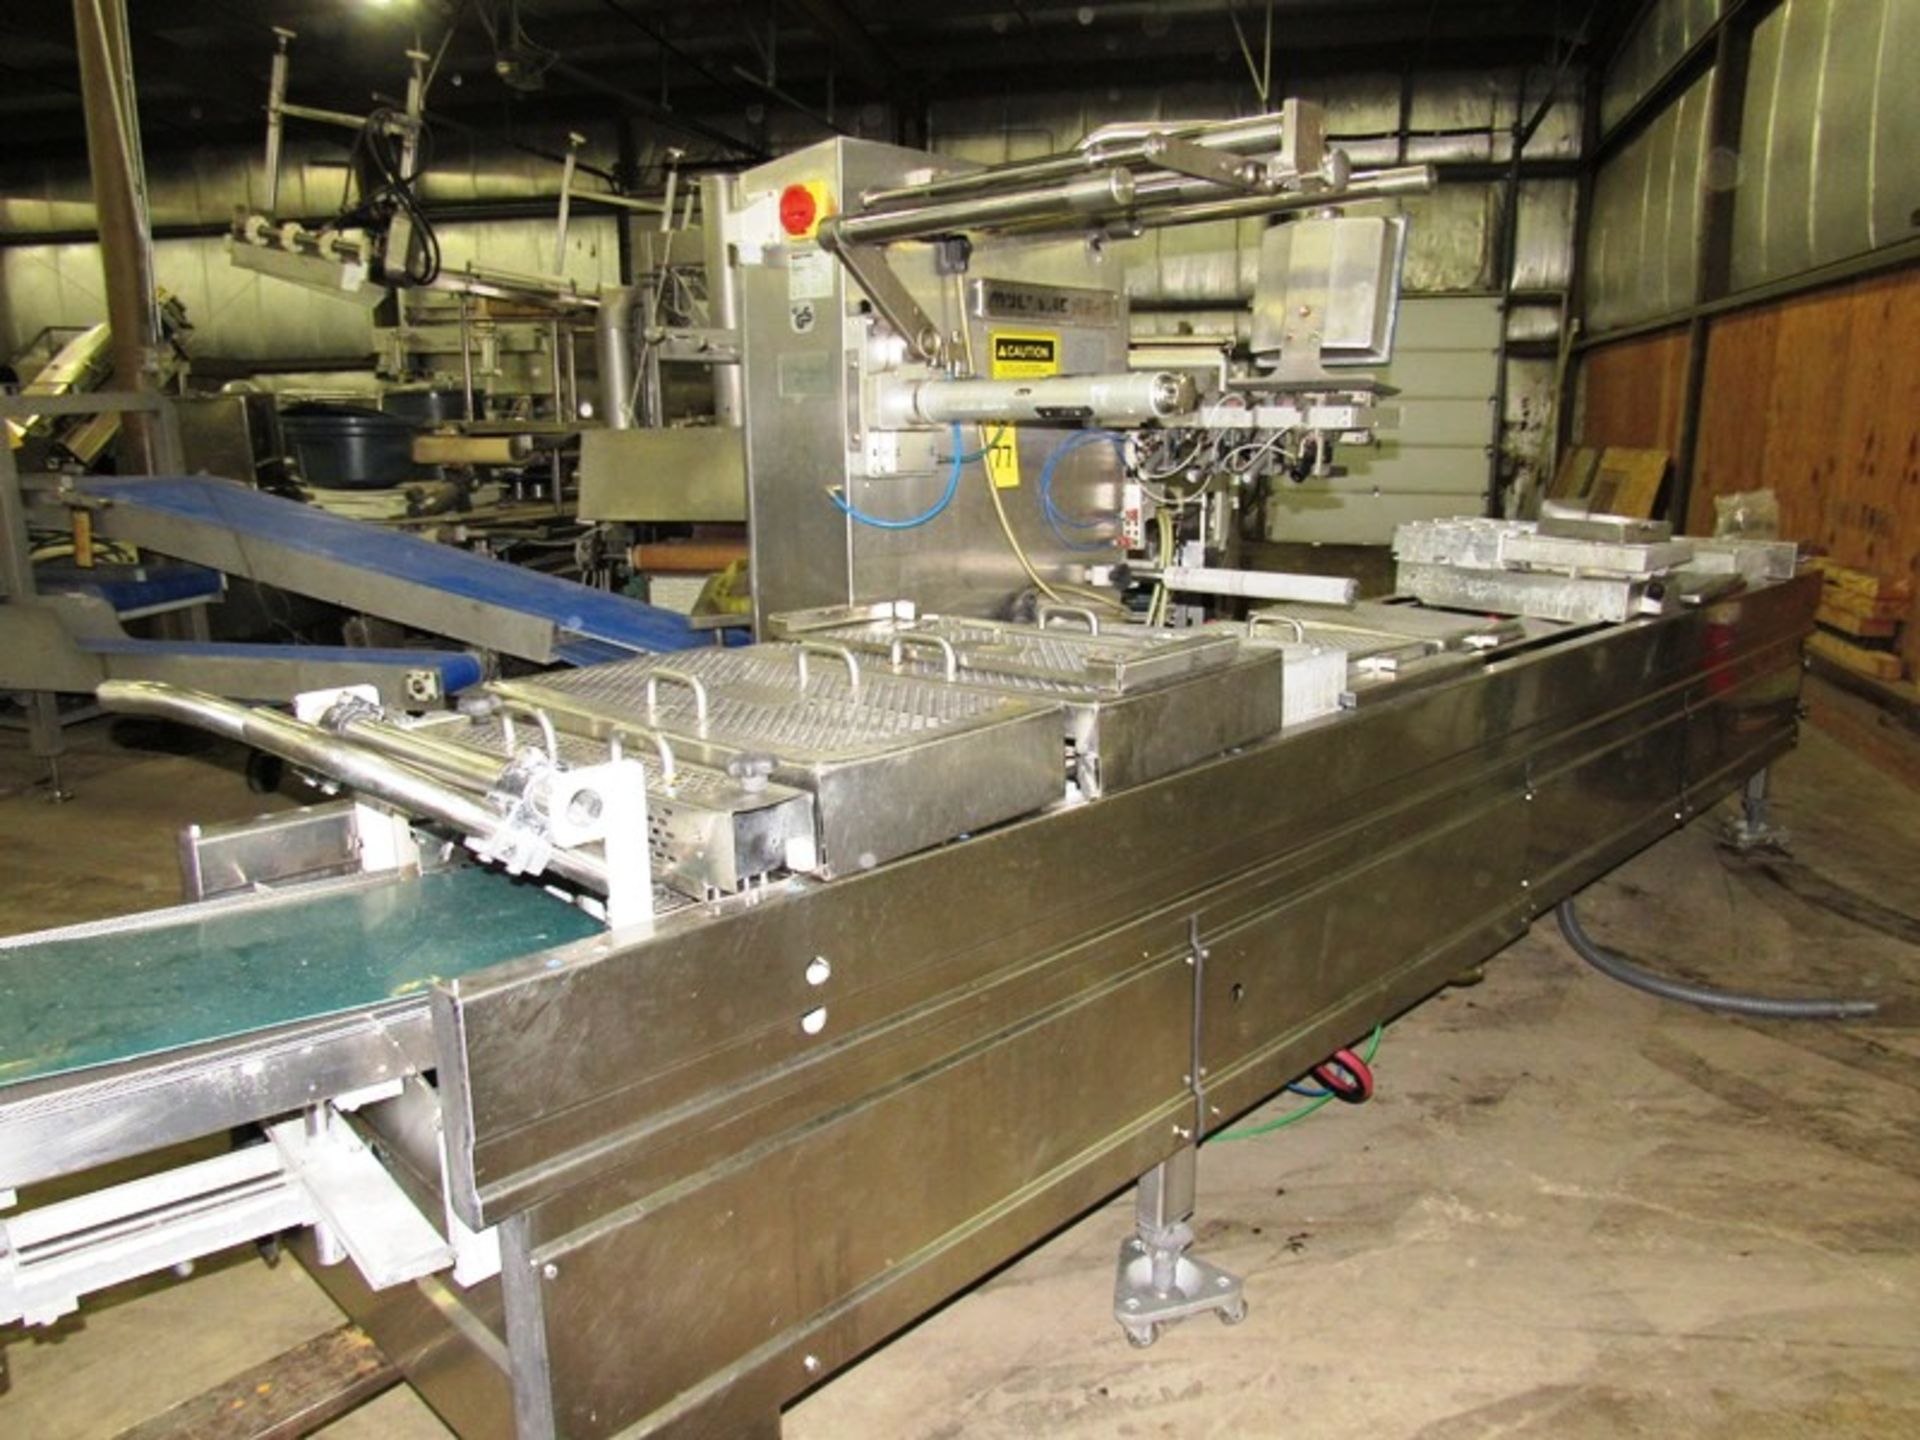 Multivac Mdl. R240 Rollstock Thermoforming Packager, Ser. #106852, approx. 450 mm between chains,